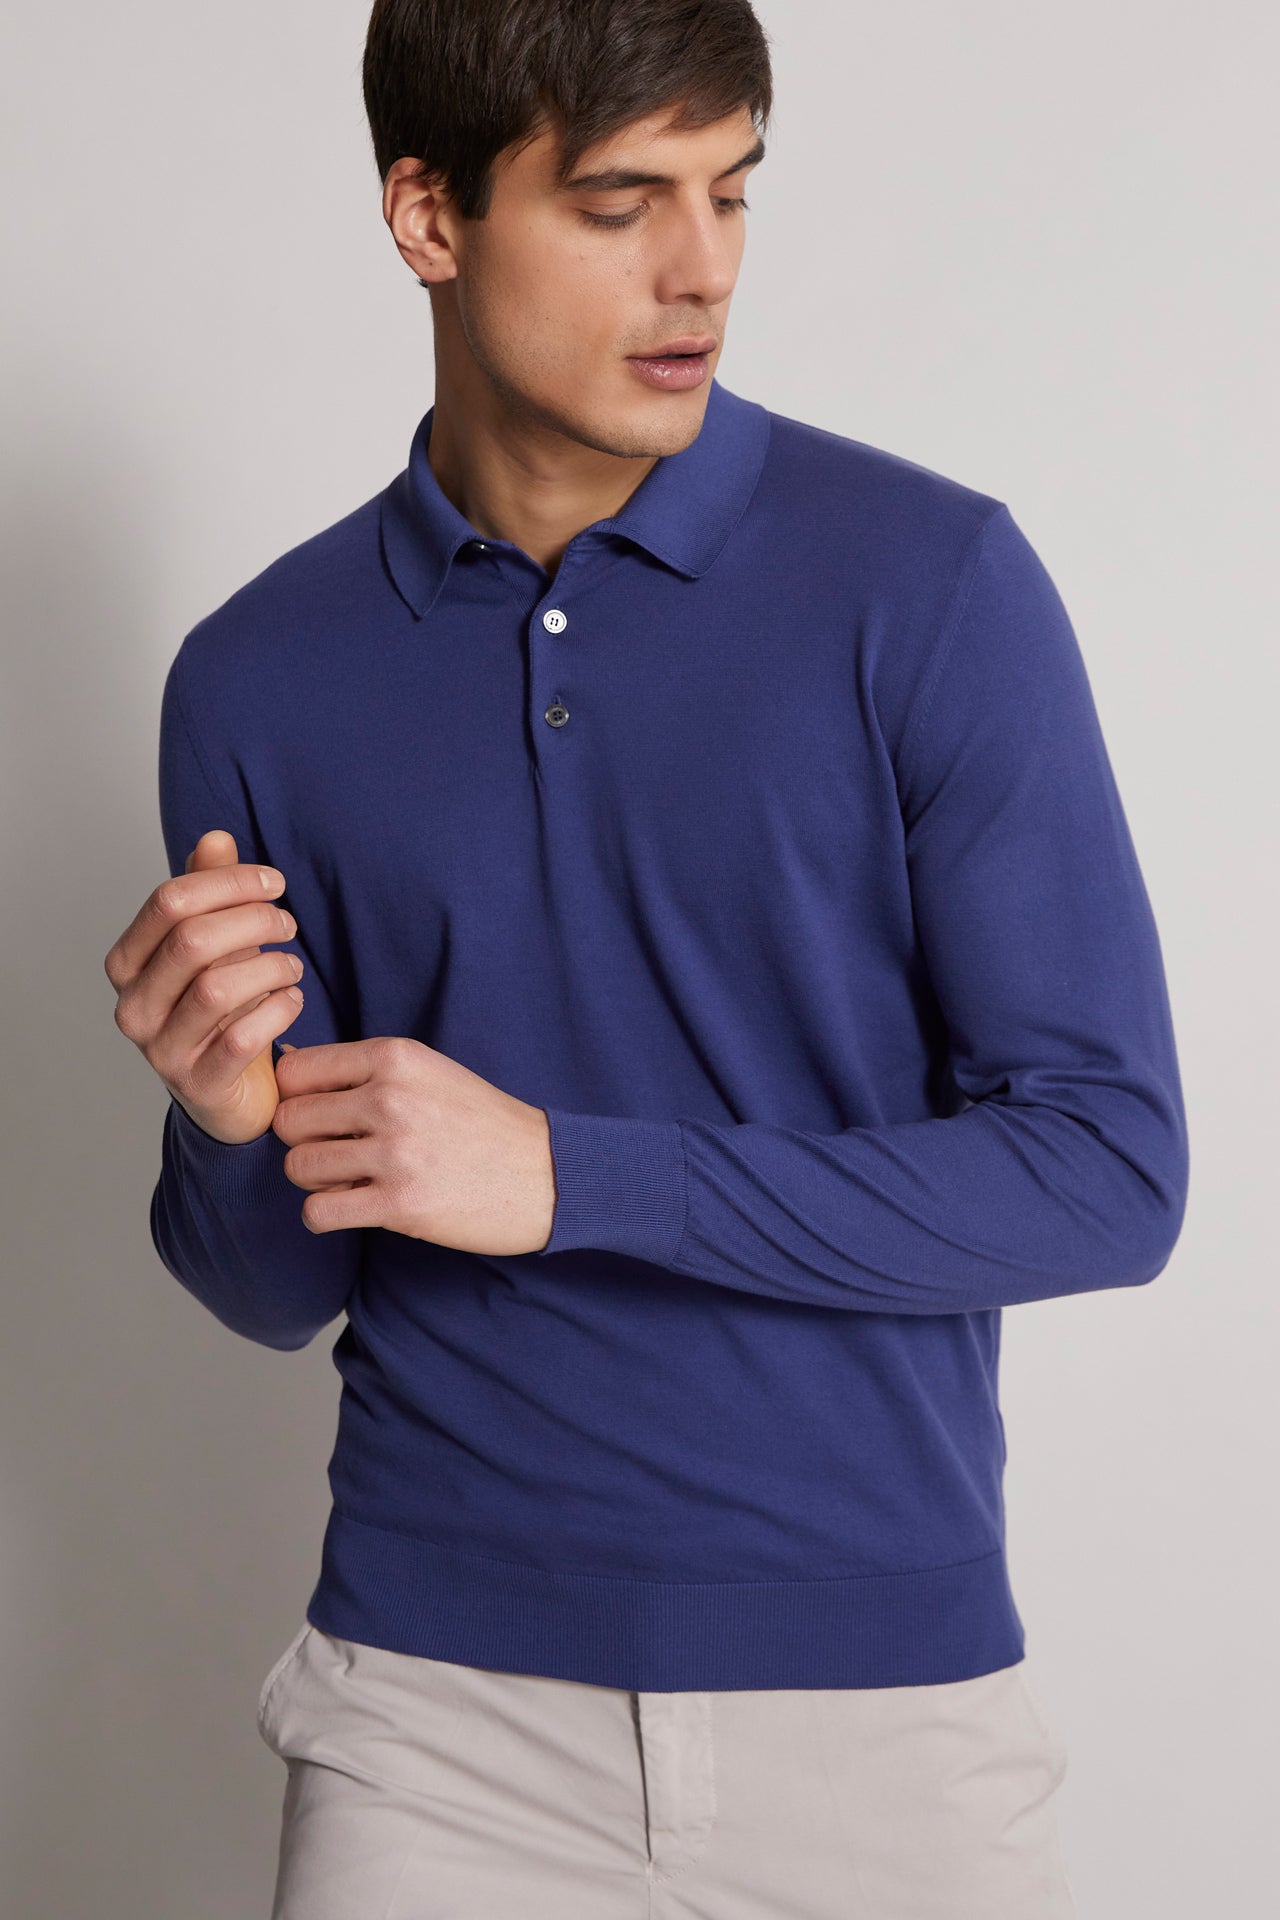 knitted organic cotton polo shirt blue - side view